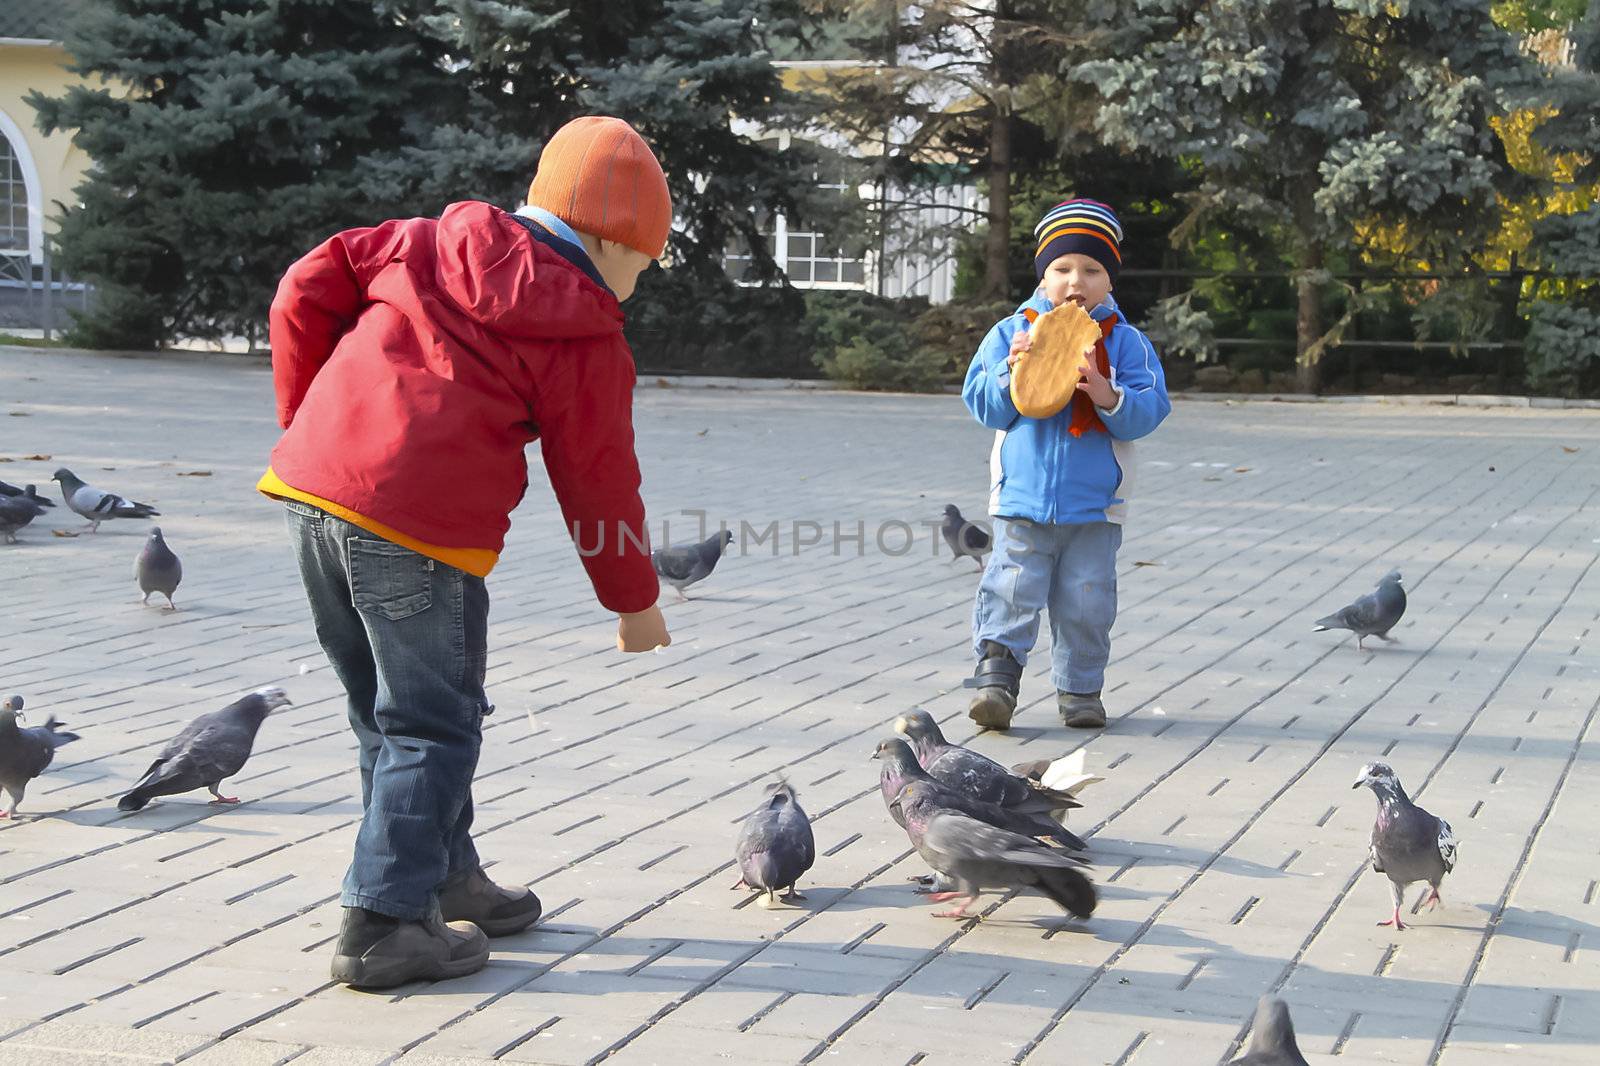 Children fed the pigeons in autumn city park by NickNick